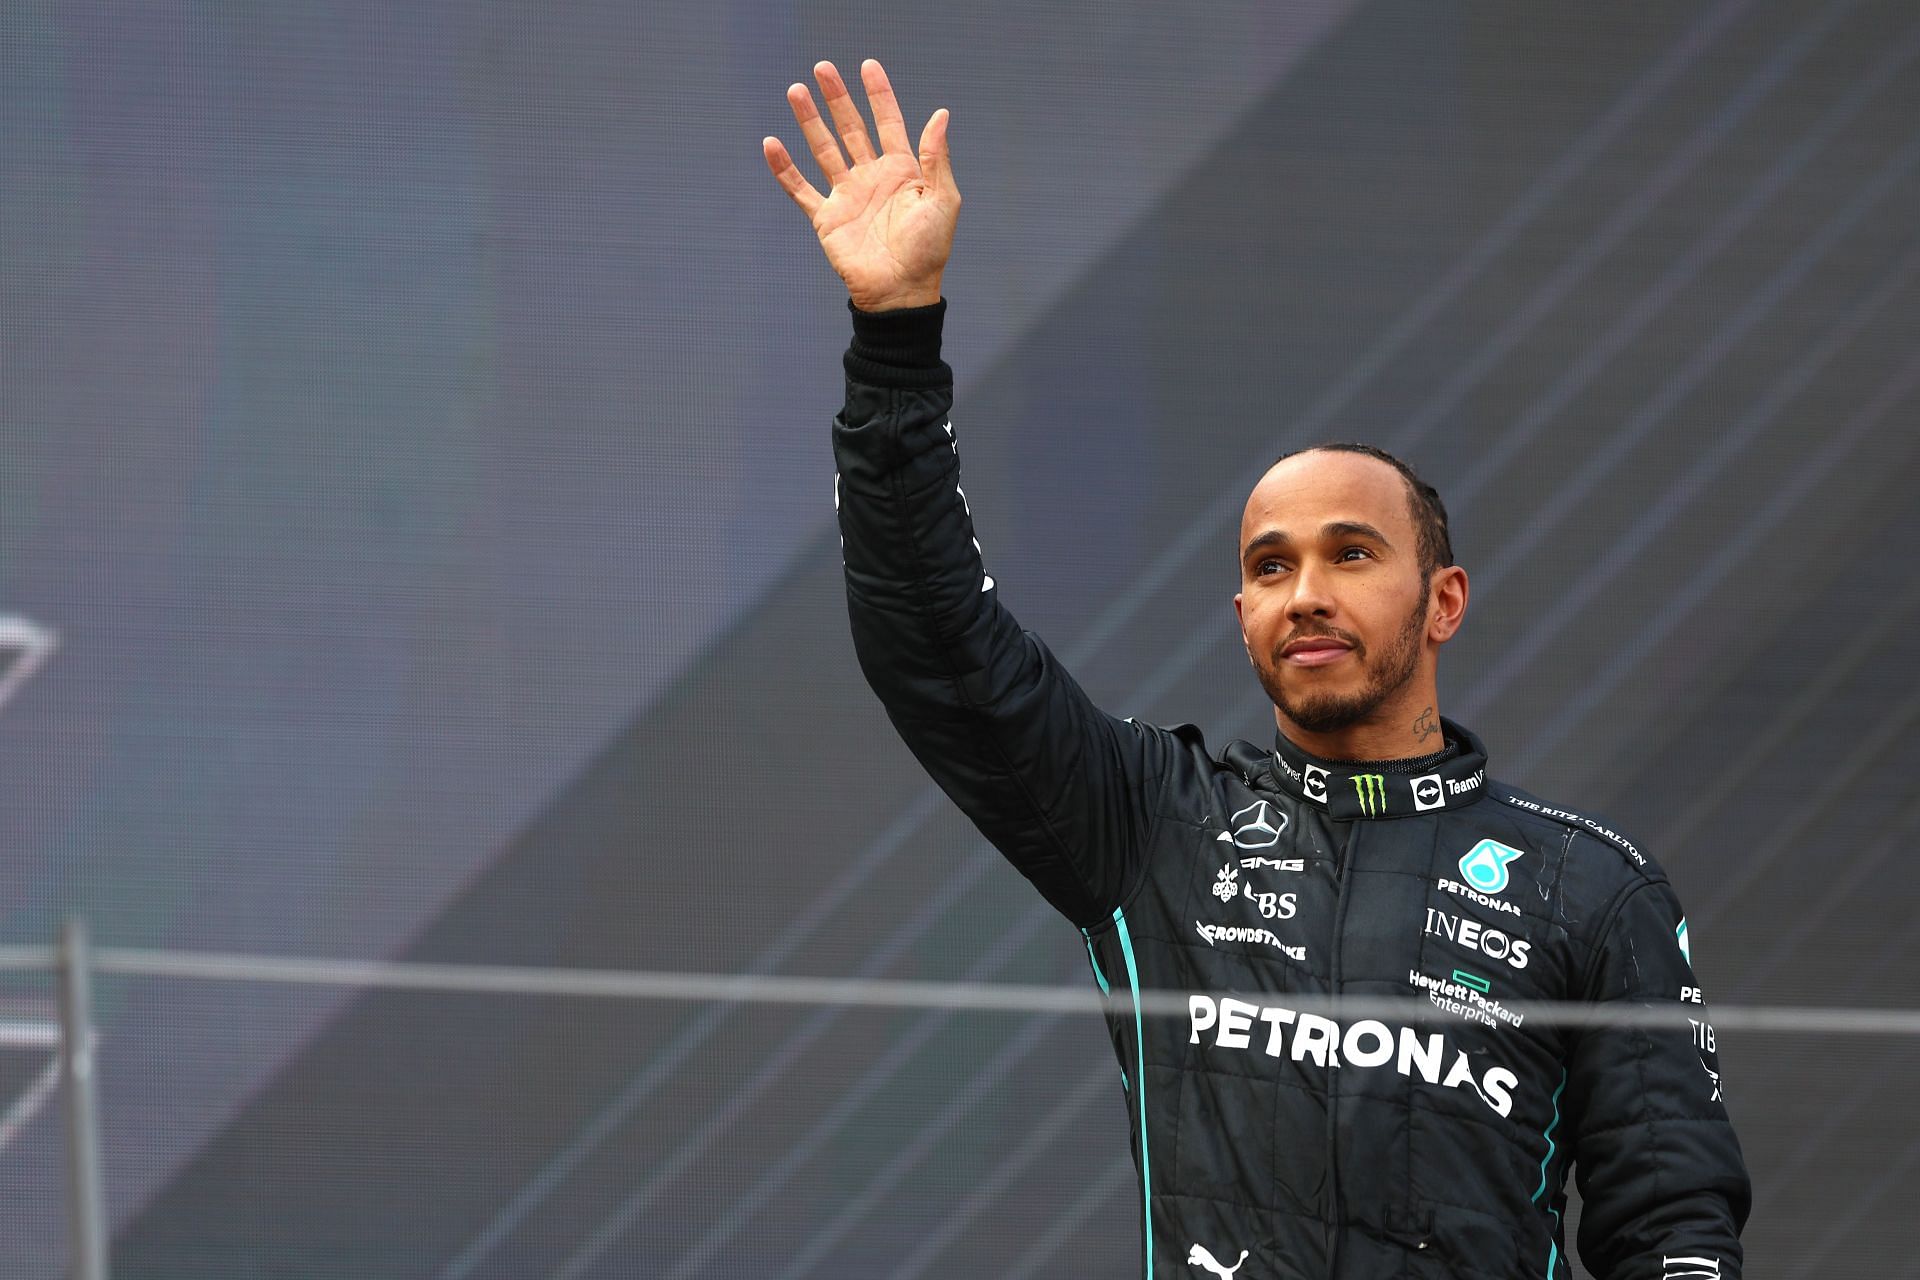 Mercedes driver Lewis Hamilton on the podium at the 2022 F1 Austrian GP (Photo by Clive Rose/Getty Images)